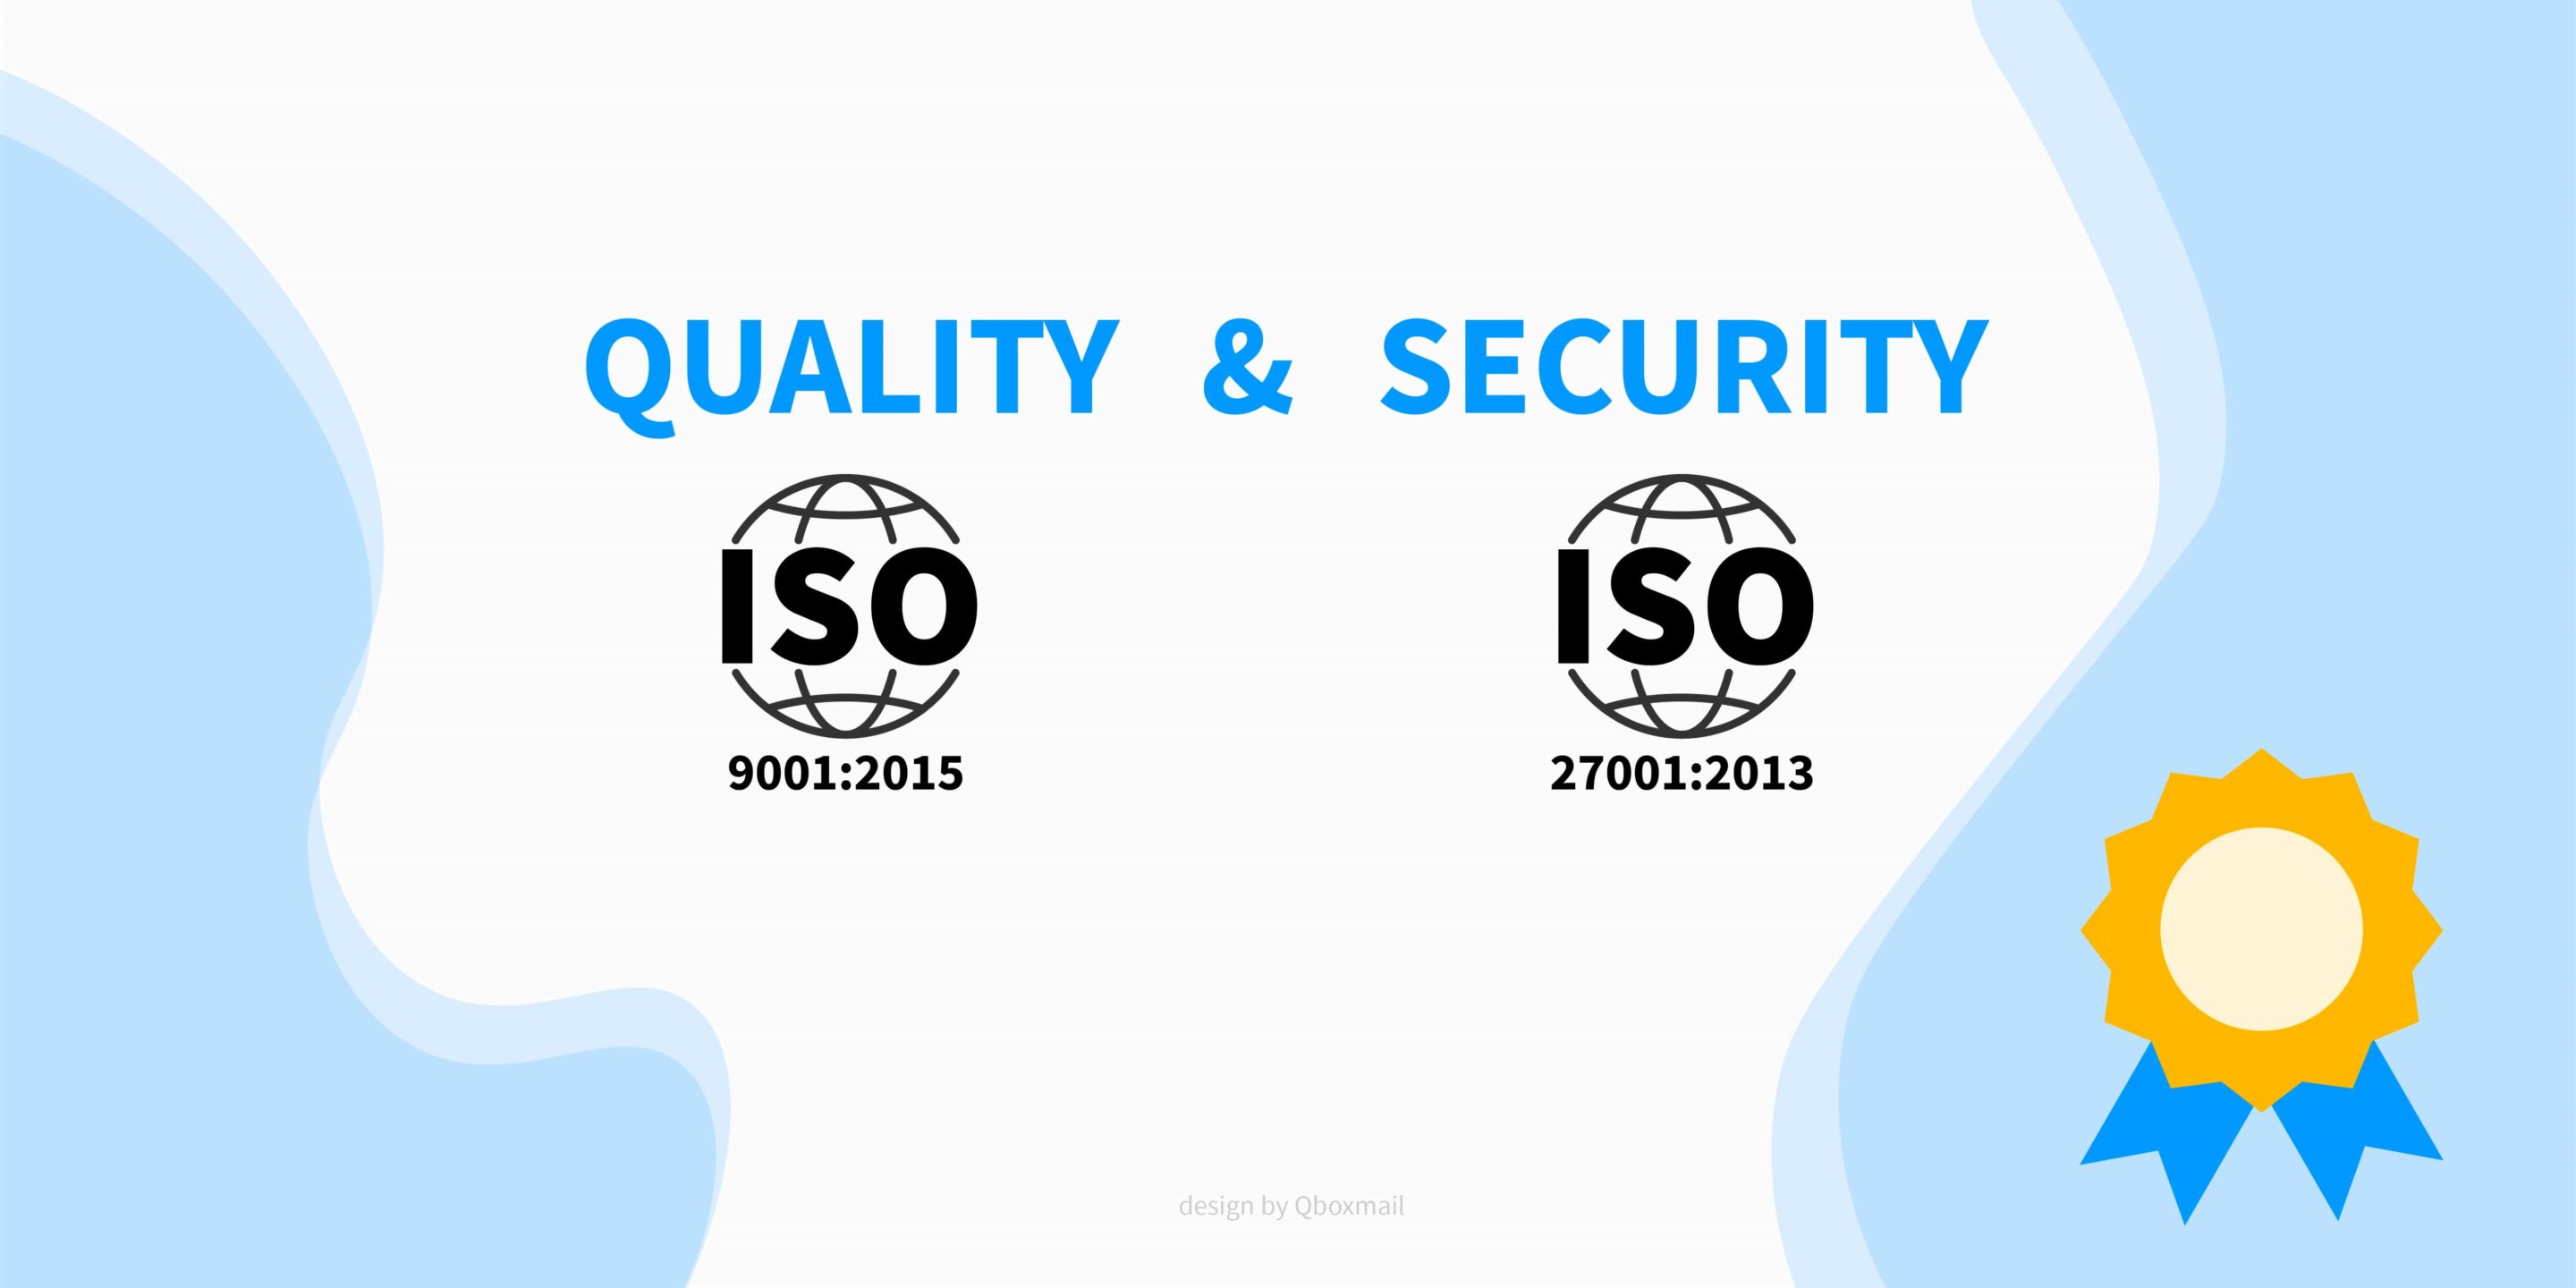 ISO 9001 and 27001 certifications